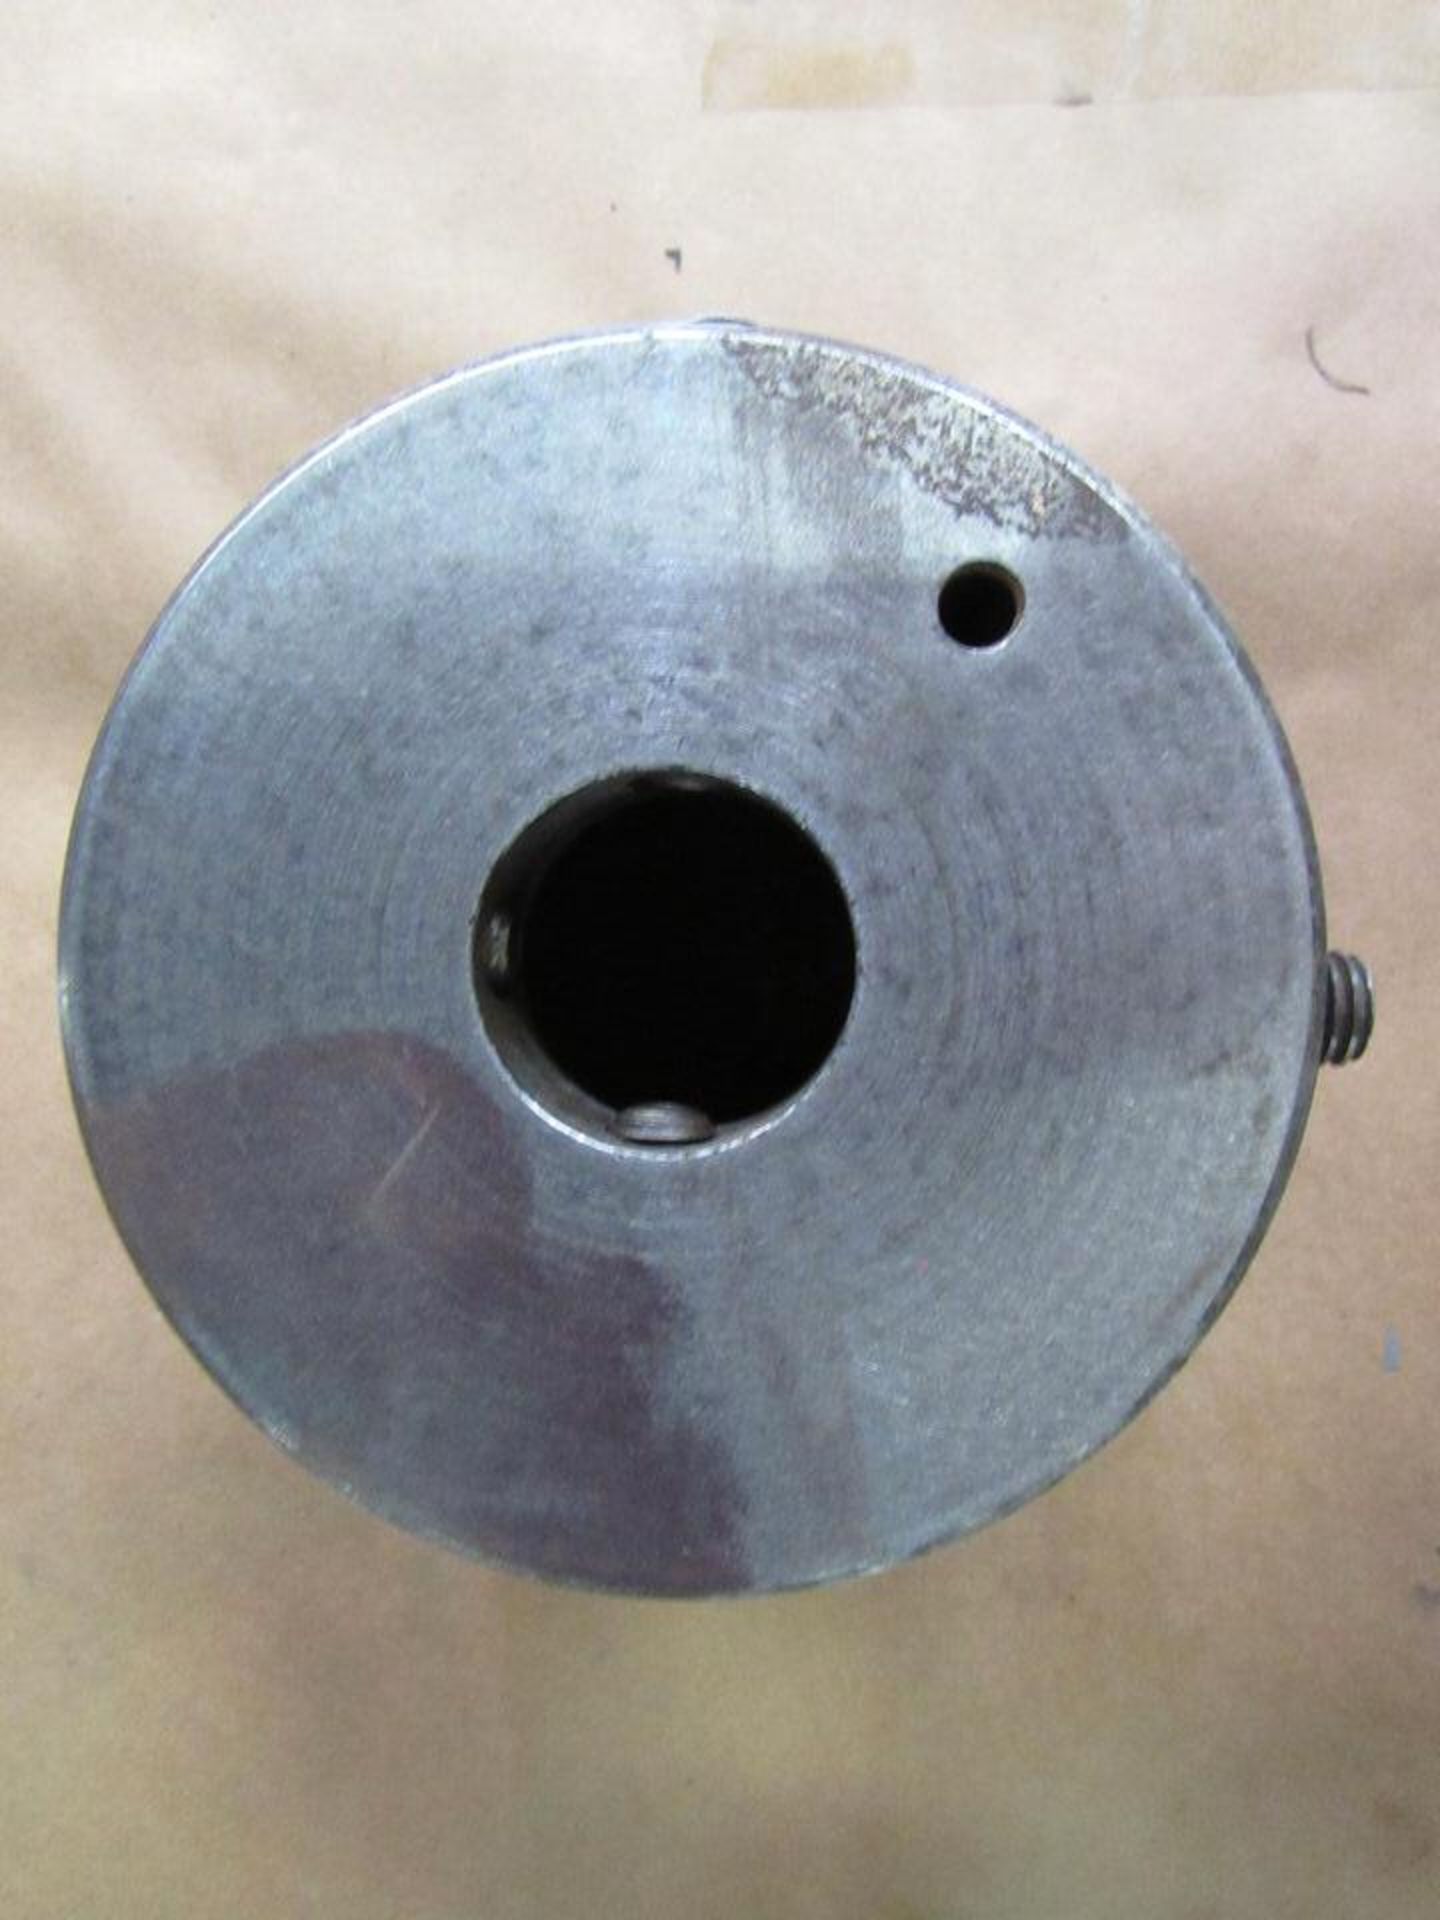 5-1/4" Adapter Fixture, 1-1/2" hole on top, 5" height, 3-1/2" hole through body, 4-1/4" deep body - Image 2 of 4